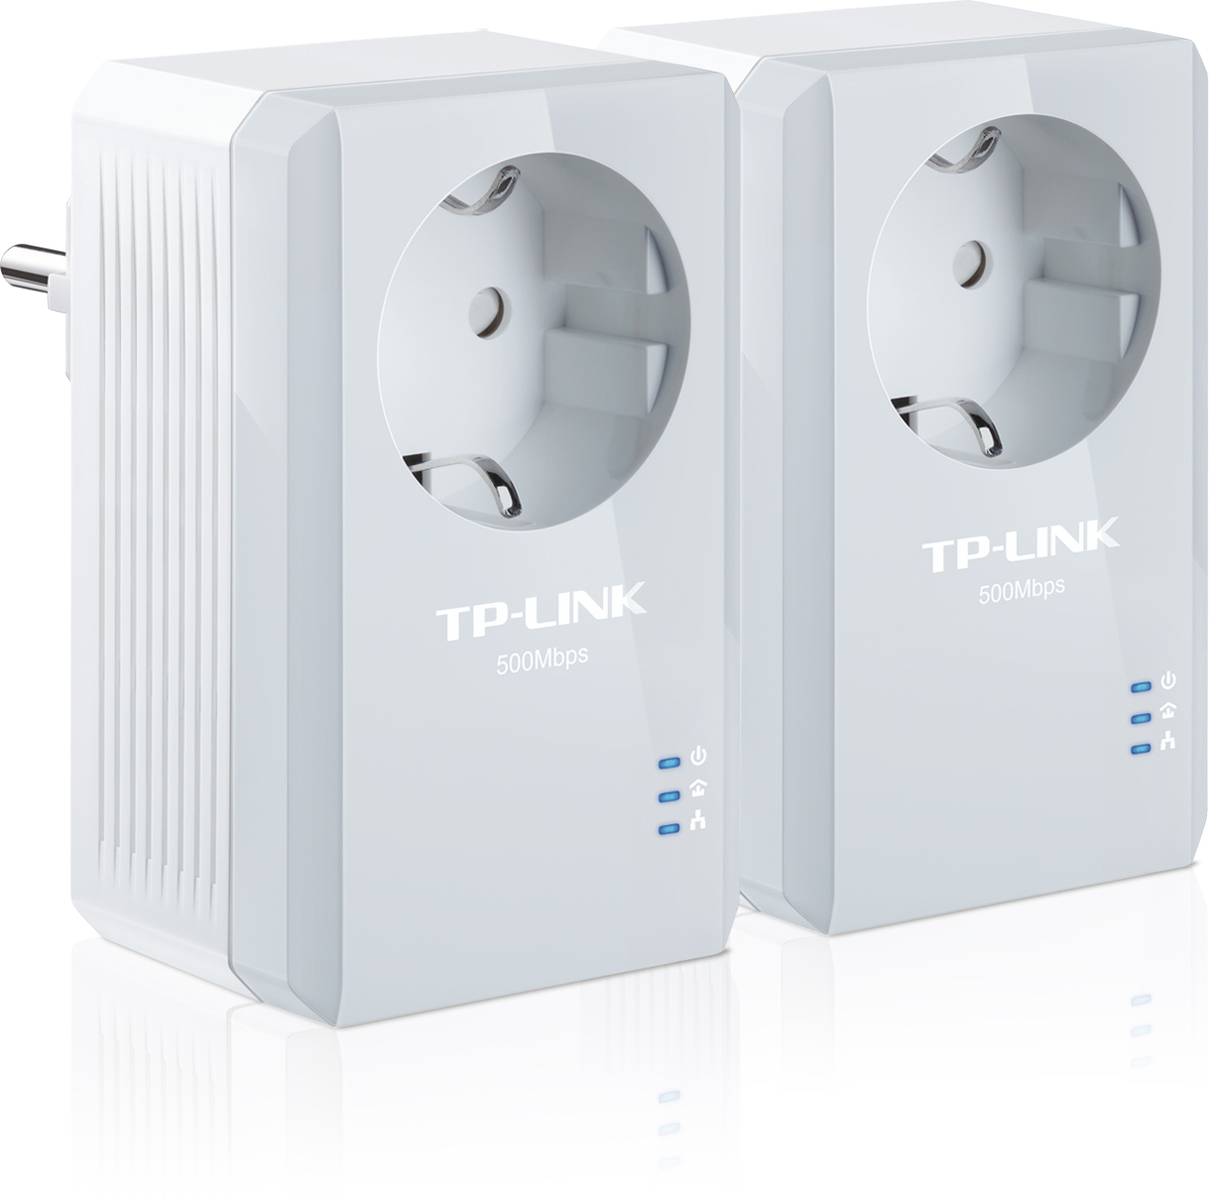 TP-LINK TL-PA4010P KIT v1 Powerline Dual for Wired Connection with Passthrough Socket and Ethernet Port